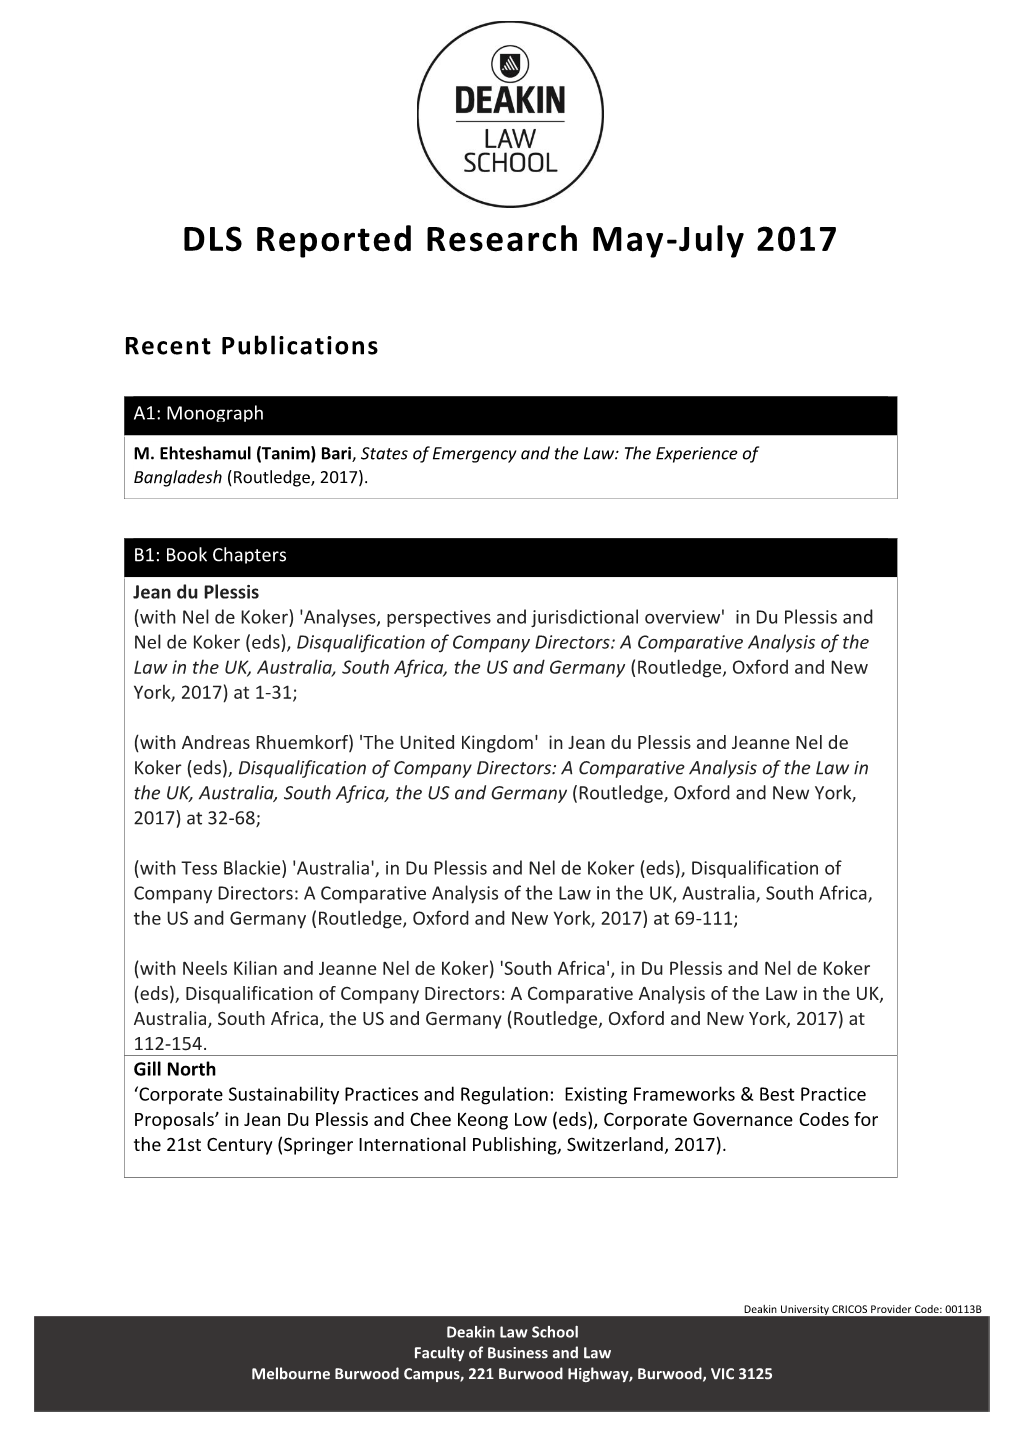 DLS Reported Research May-July 2017